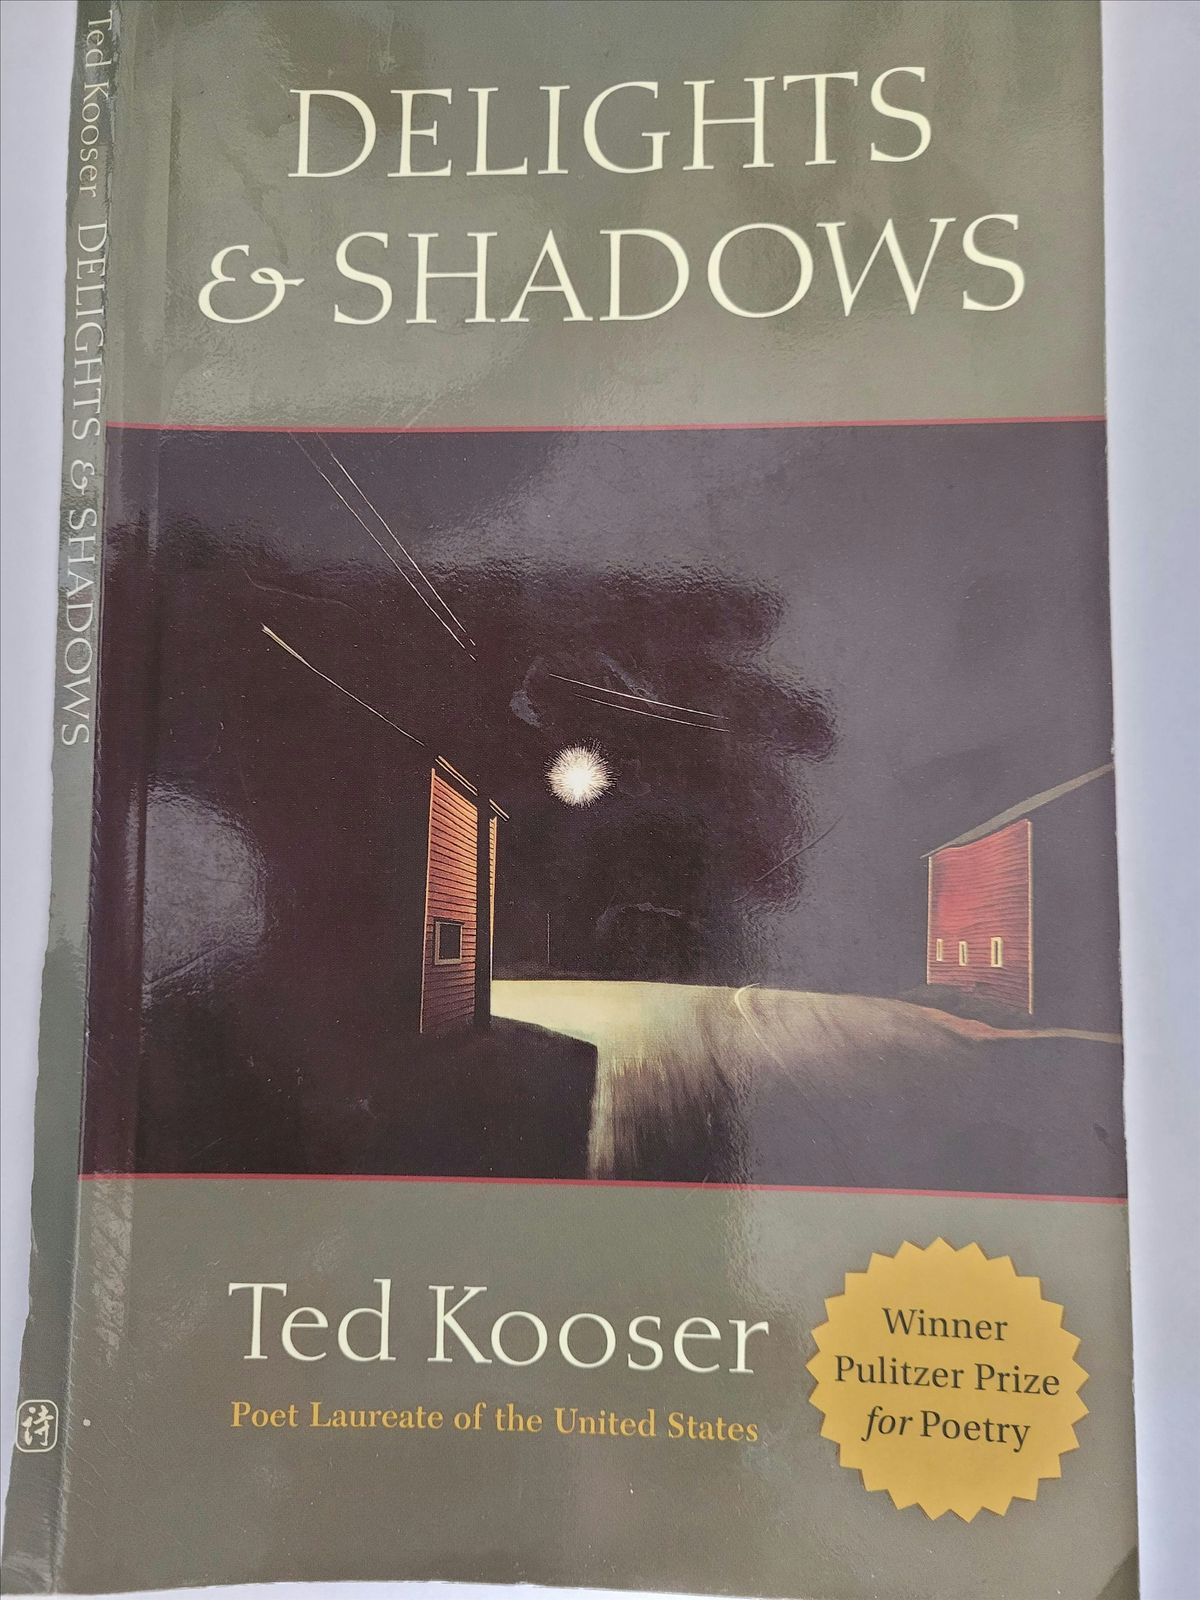 Delights & Shadows: A Tribute to Poet Ted Kooser